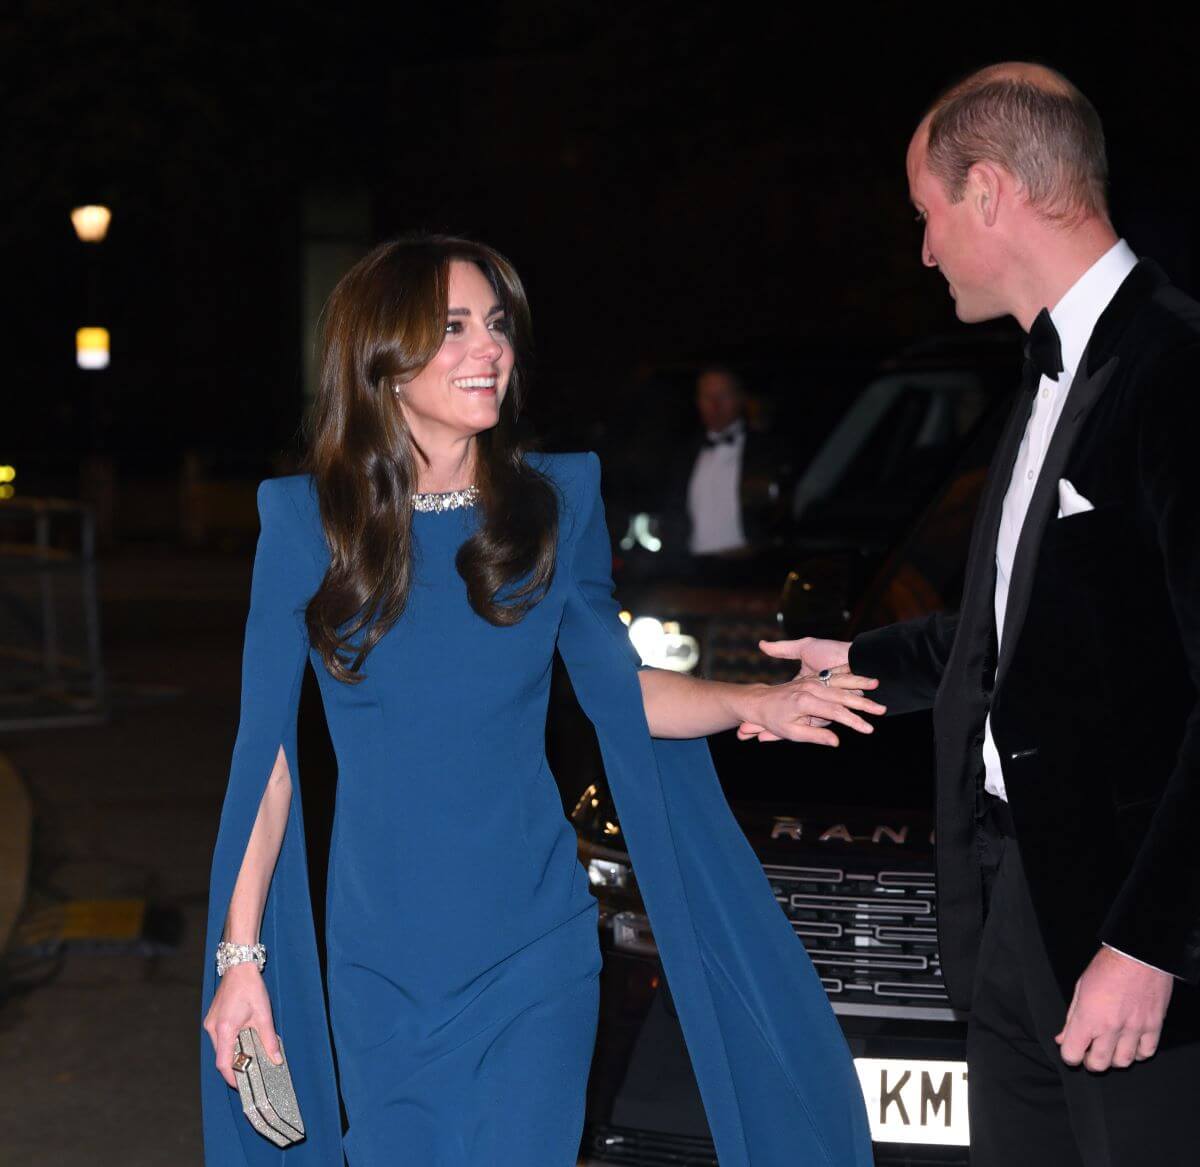 Prince William reaches for his wife Kate Middleton's hand as they arrive to attend The 2023 Royal Variety Performance in London